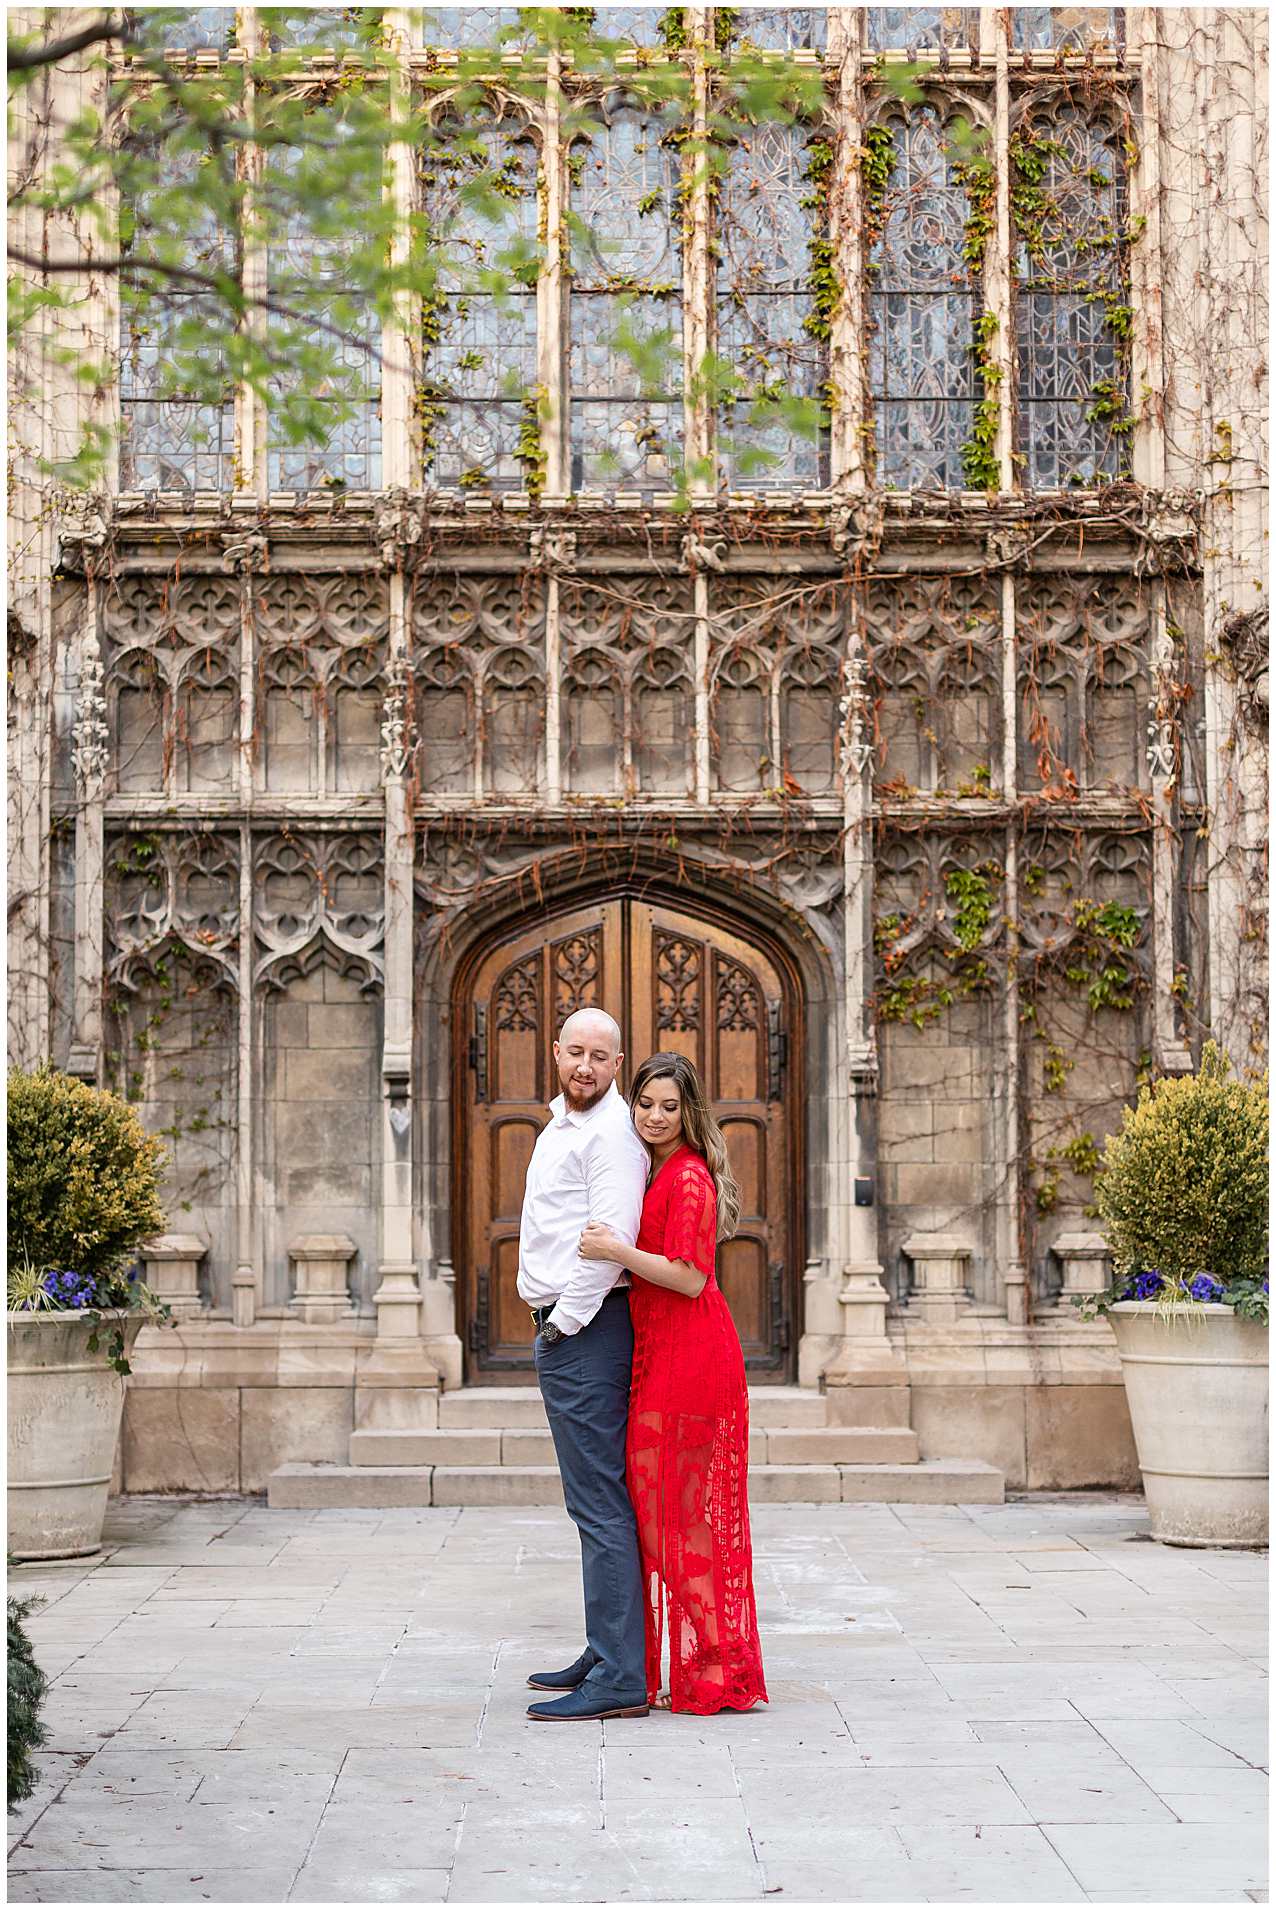 Summer Engagement Photos at the University of Chicago campus in Chicago, Illinois